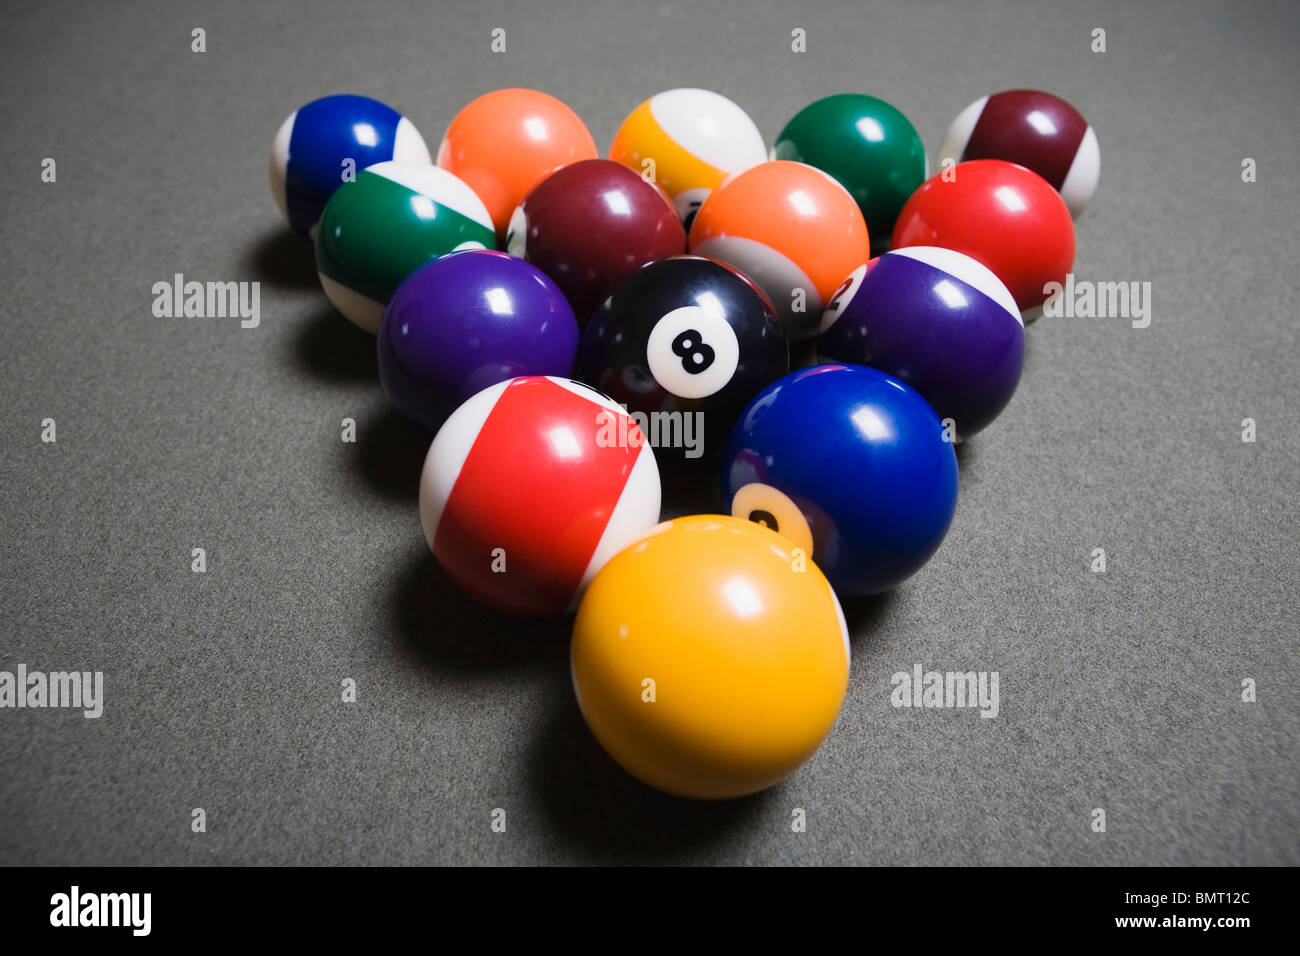 Pool Balls On A Billiard Table With The Eight Ball Facing Upwards Stock Photo